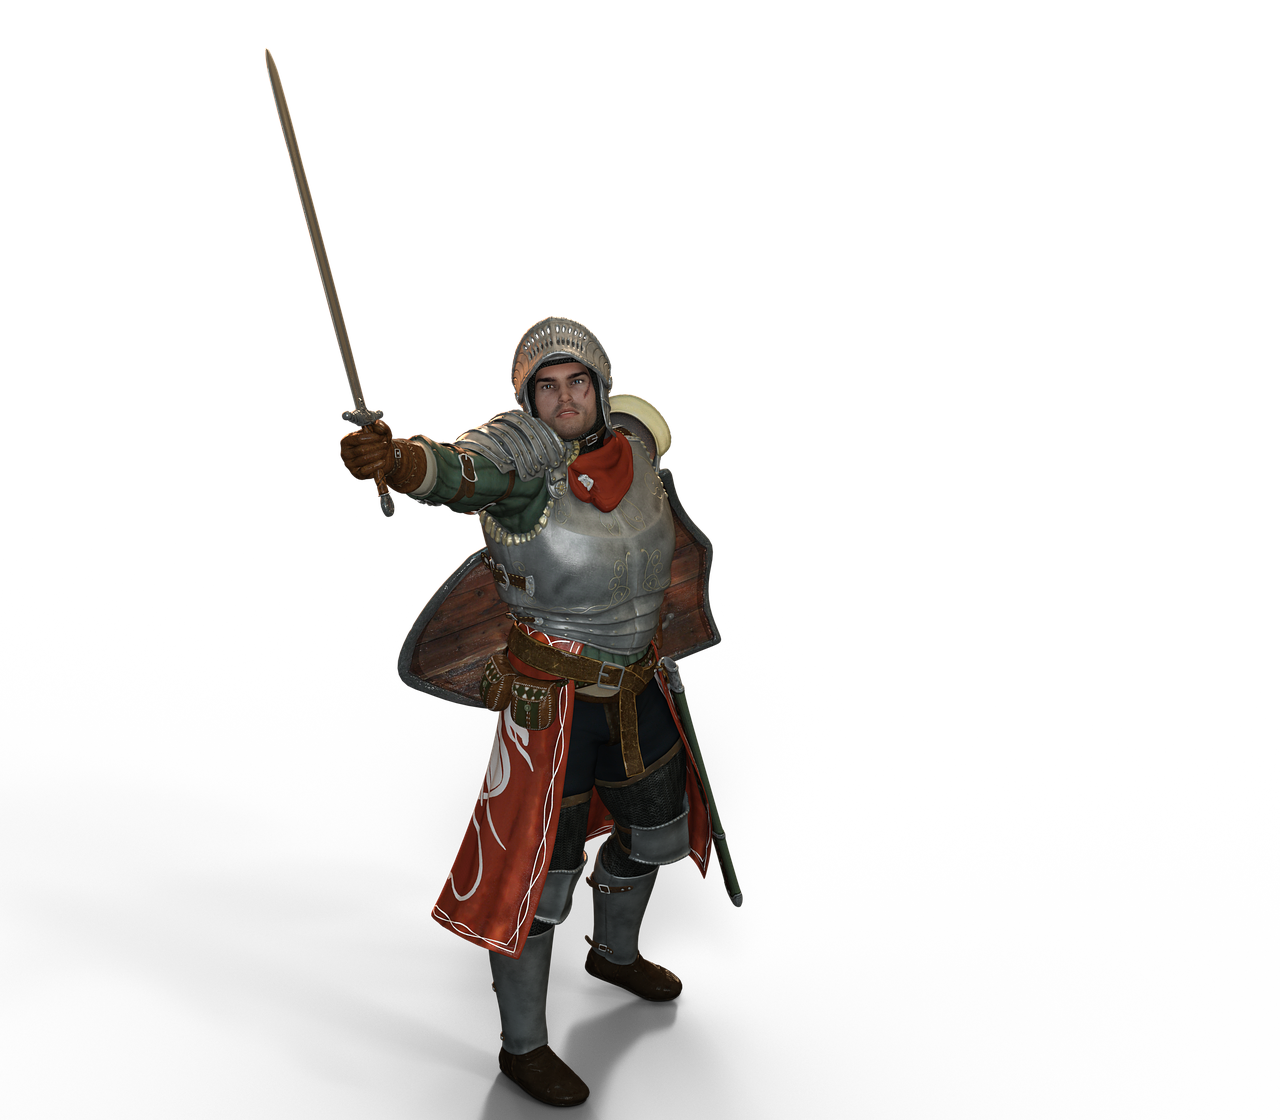 a man dressed in armor holding a sword, a raytraced image, inspired by Jacopo de' Barbari, polycount, renaissance, white and orange breastplate, ingame image, soldier, wearing green armor and helmet